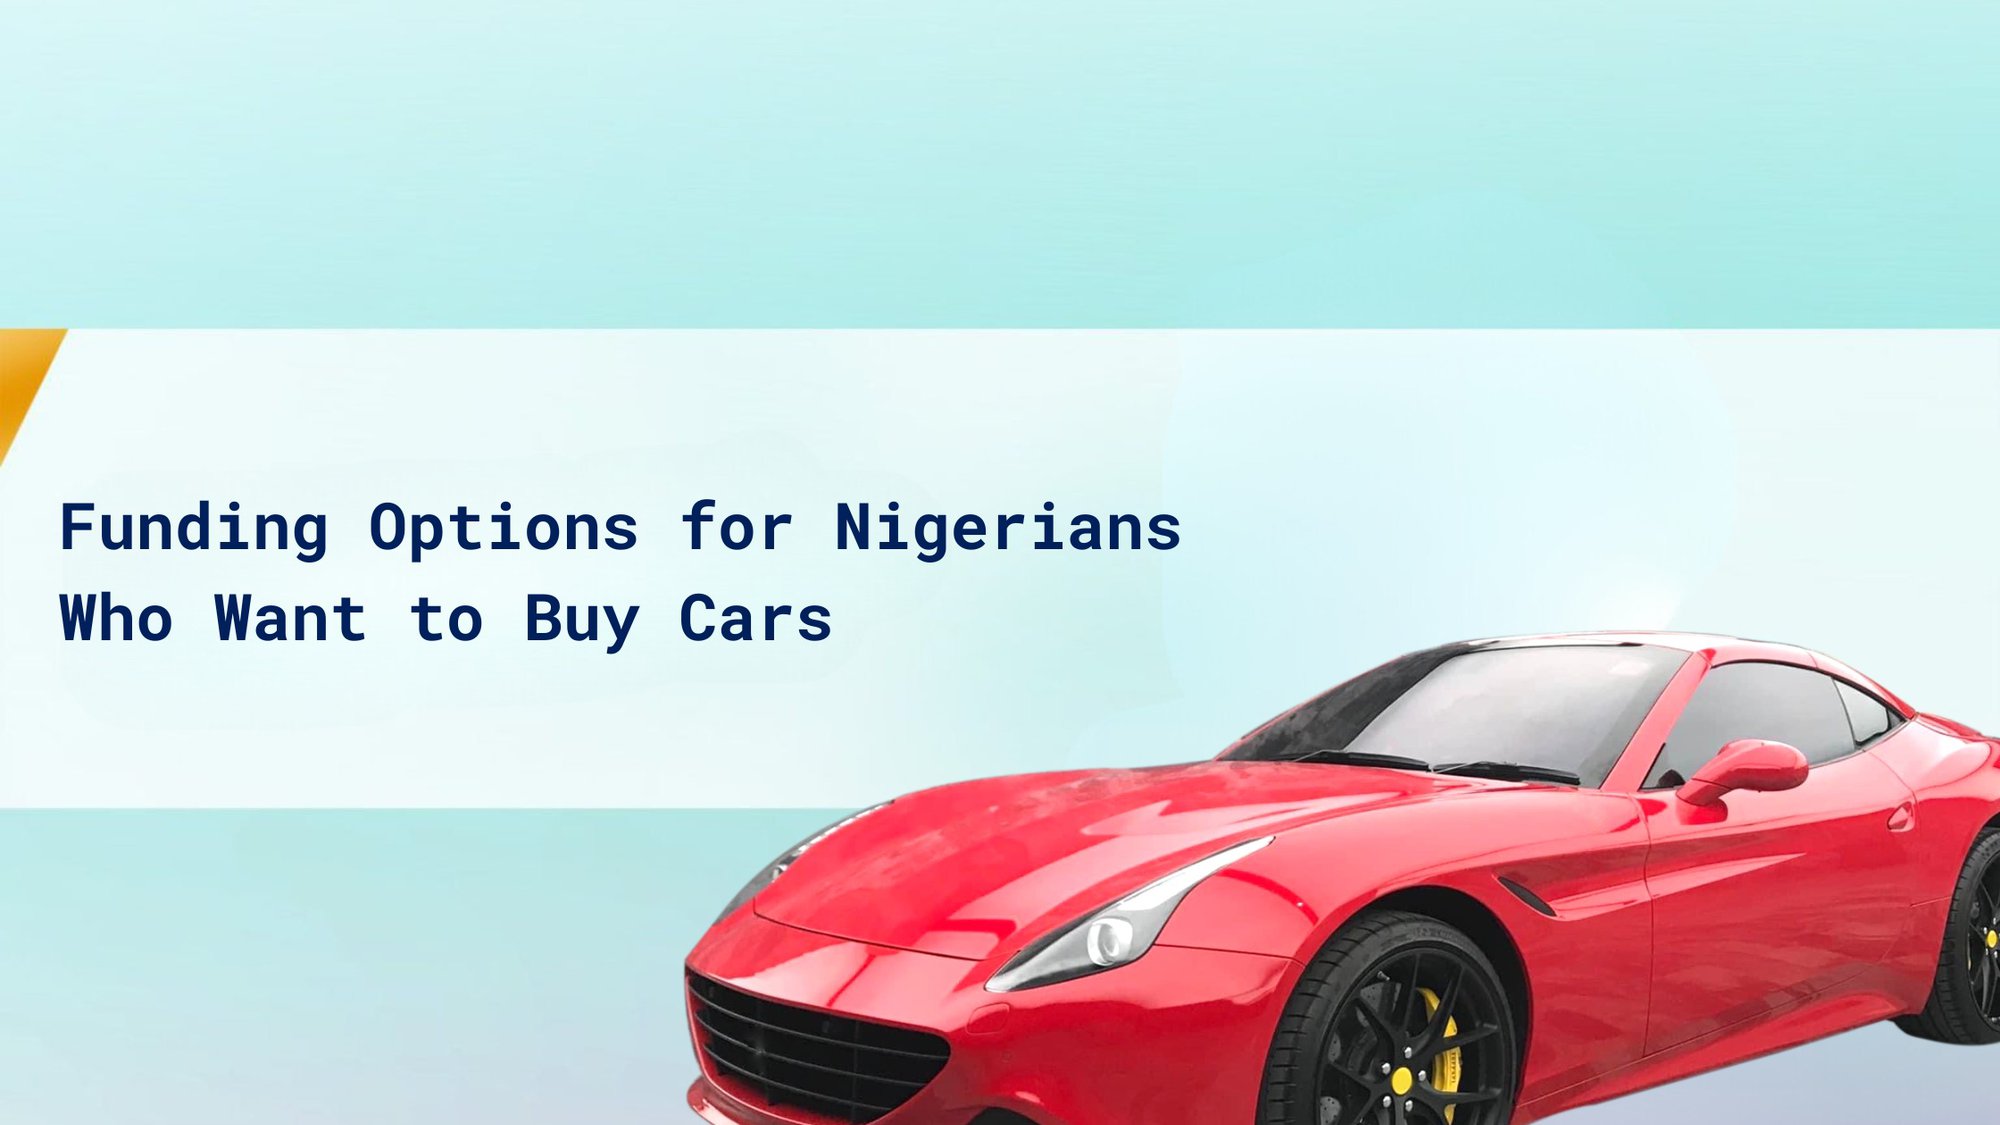 Funding Options for Nigerians who want to buy cars